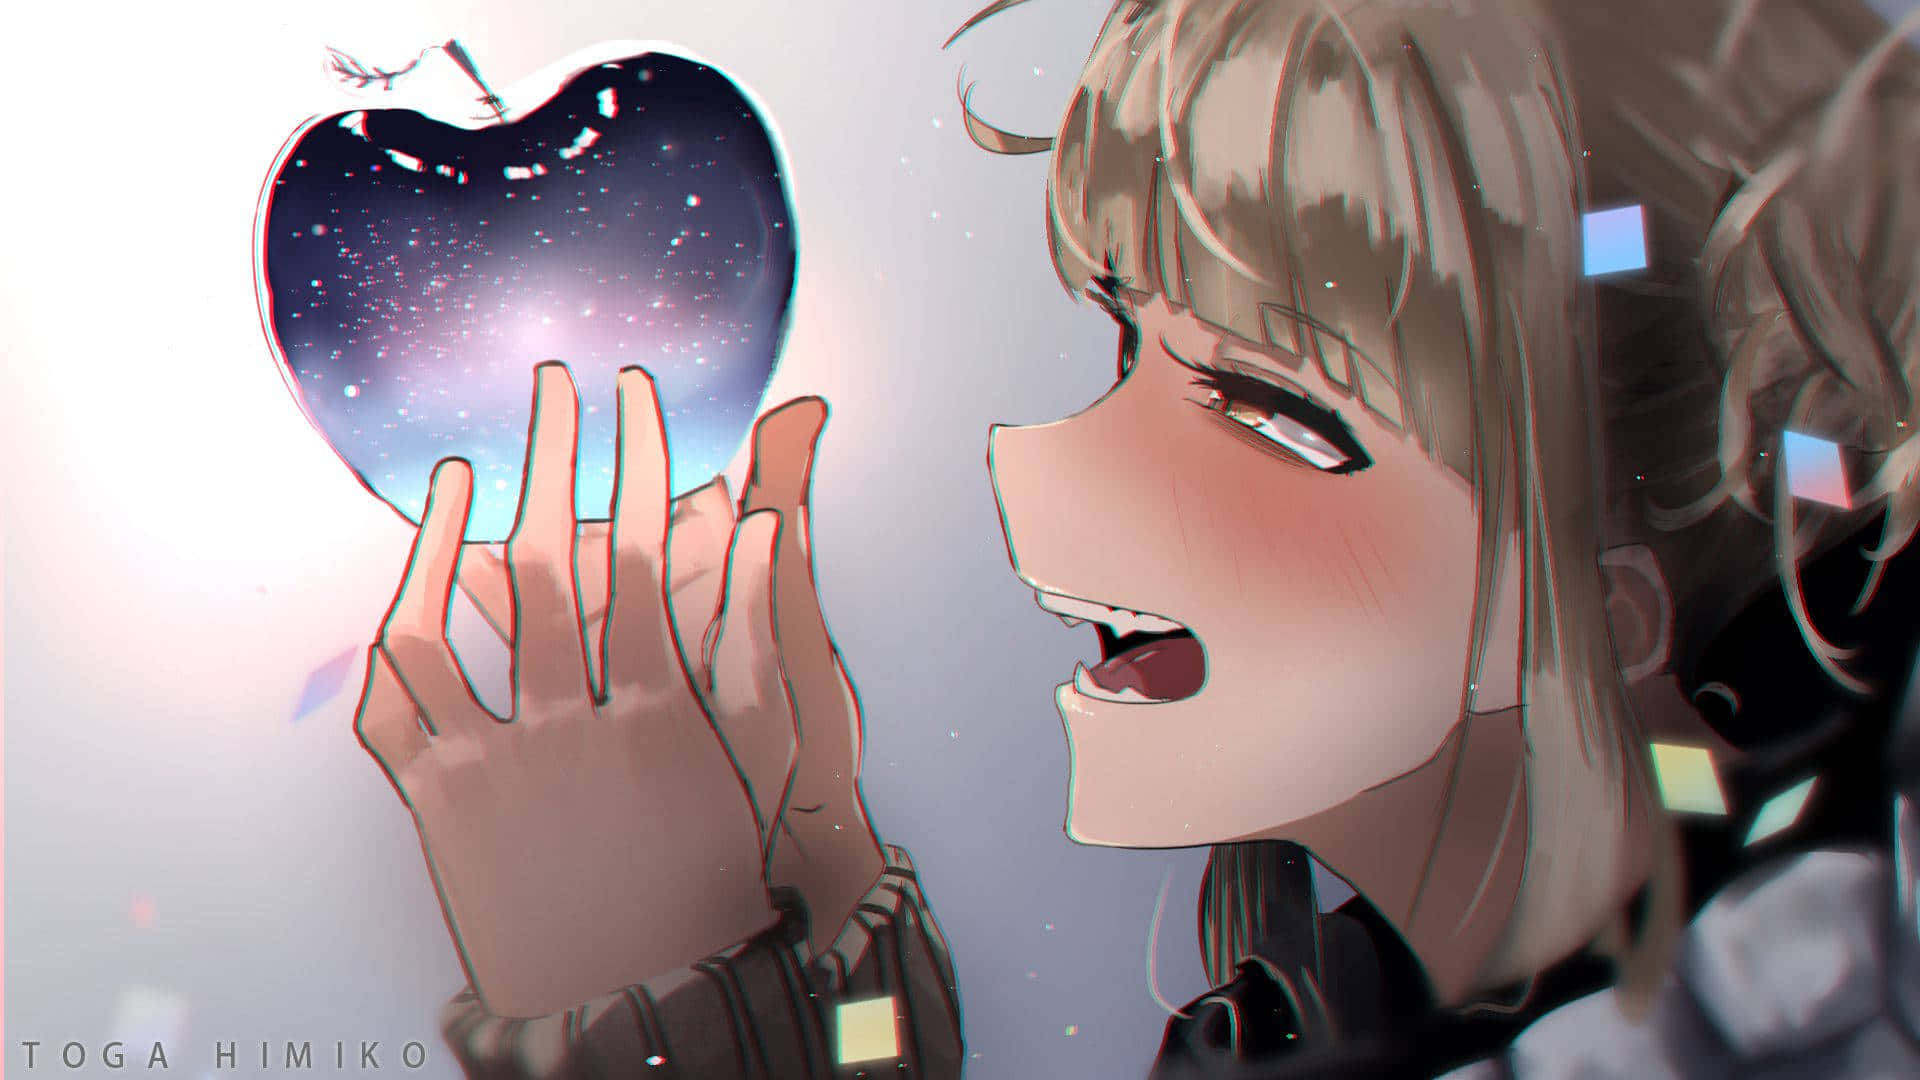 Himiko Toga Aesthetic With A Cosmic Apple Wallpaper